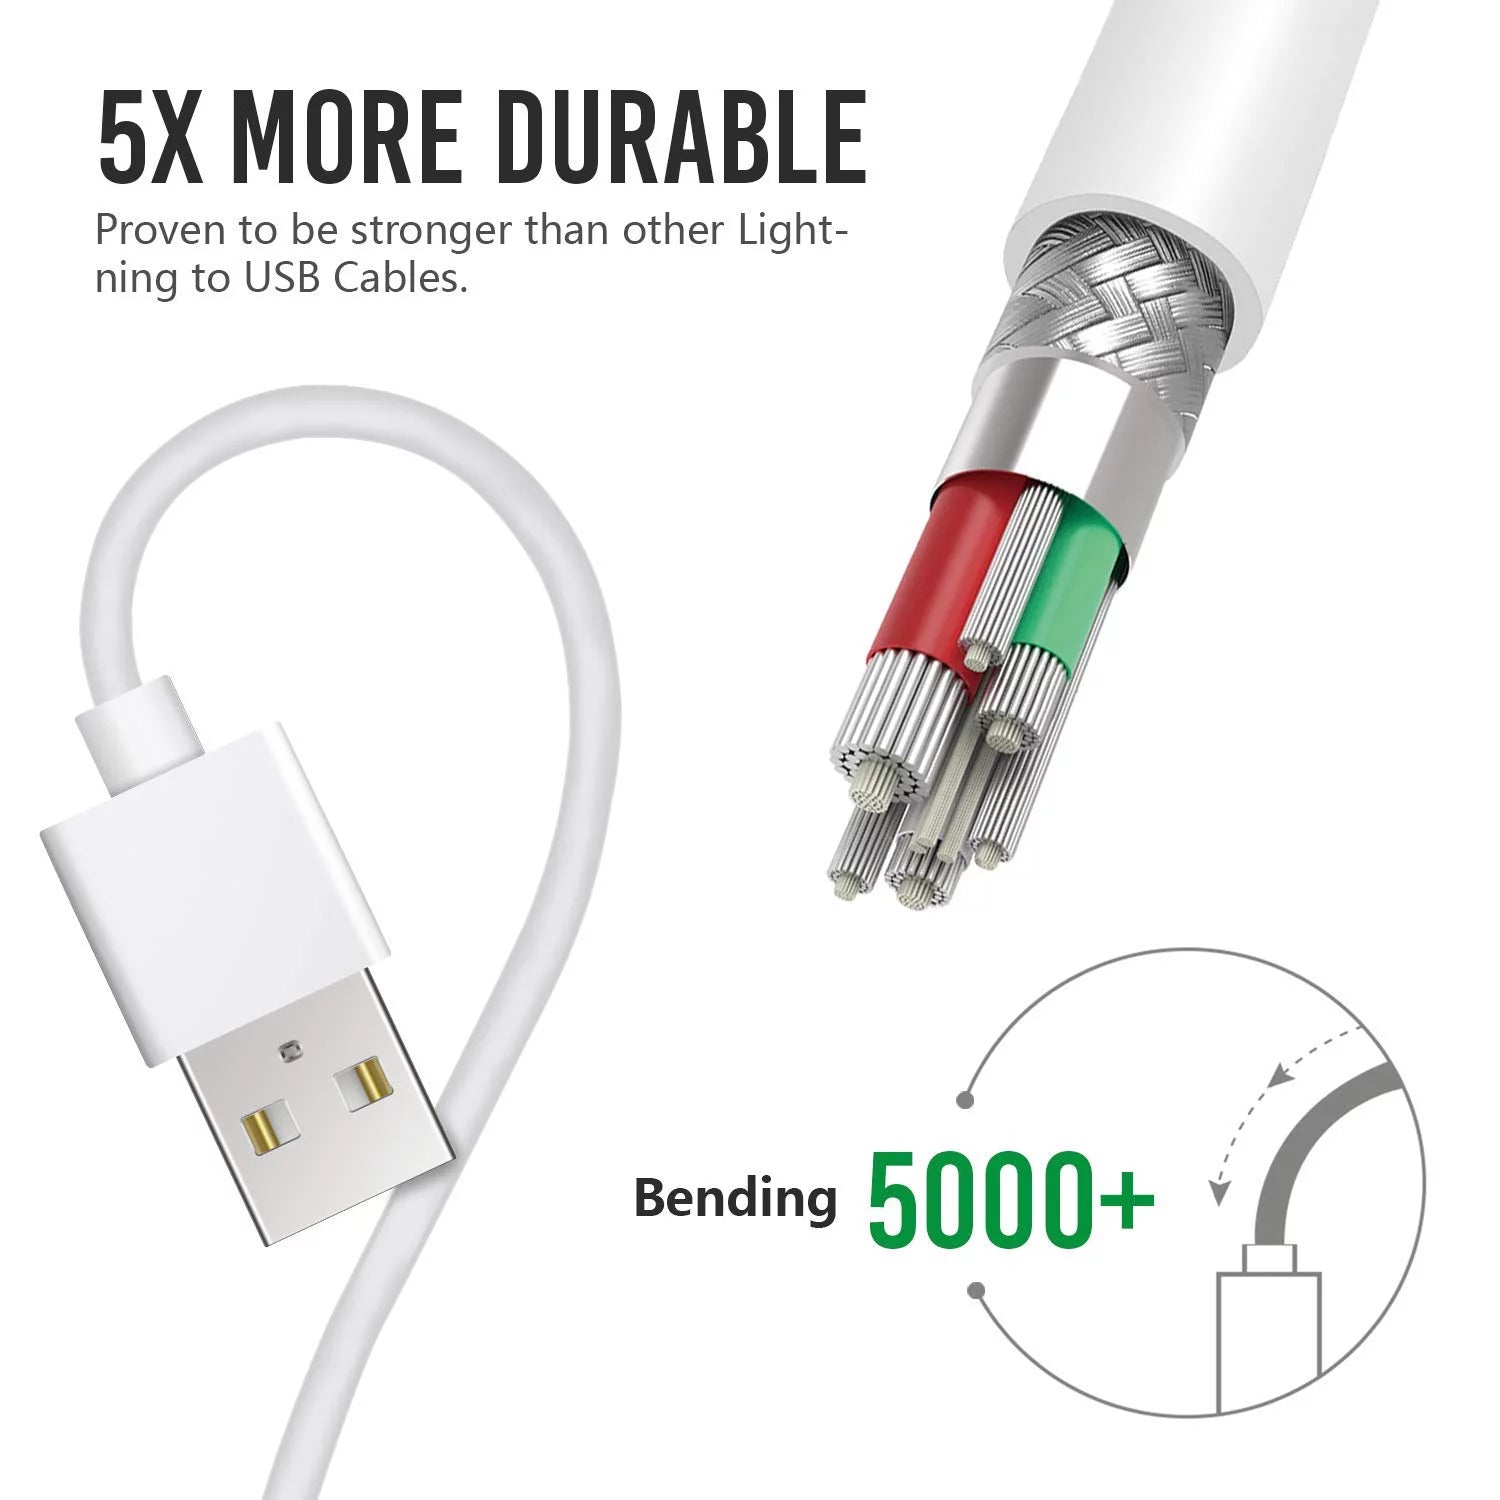 iPhone Charger Lightning Cable, 2 Pack 6FT USB Cable Compatible with iPhone Xs,Xs Max,XR,X,8,8 Plus,7,7 Plus,6S,6S Plus,iPad Air,Mini/iPod Touch/Case, Fast Syncing Cord